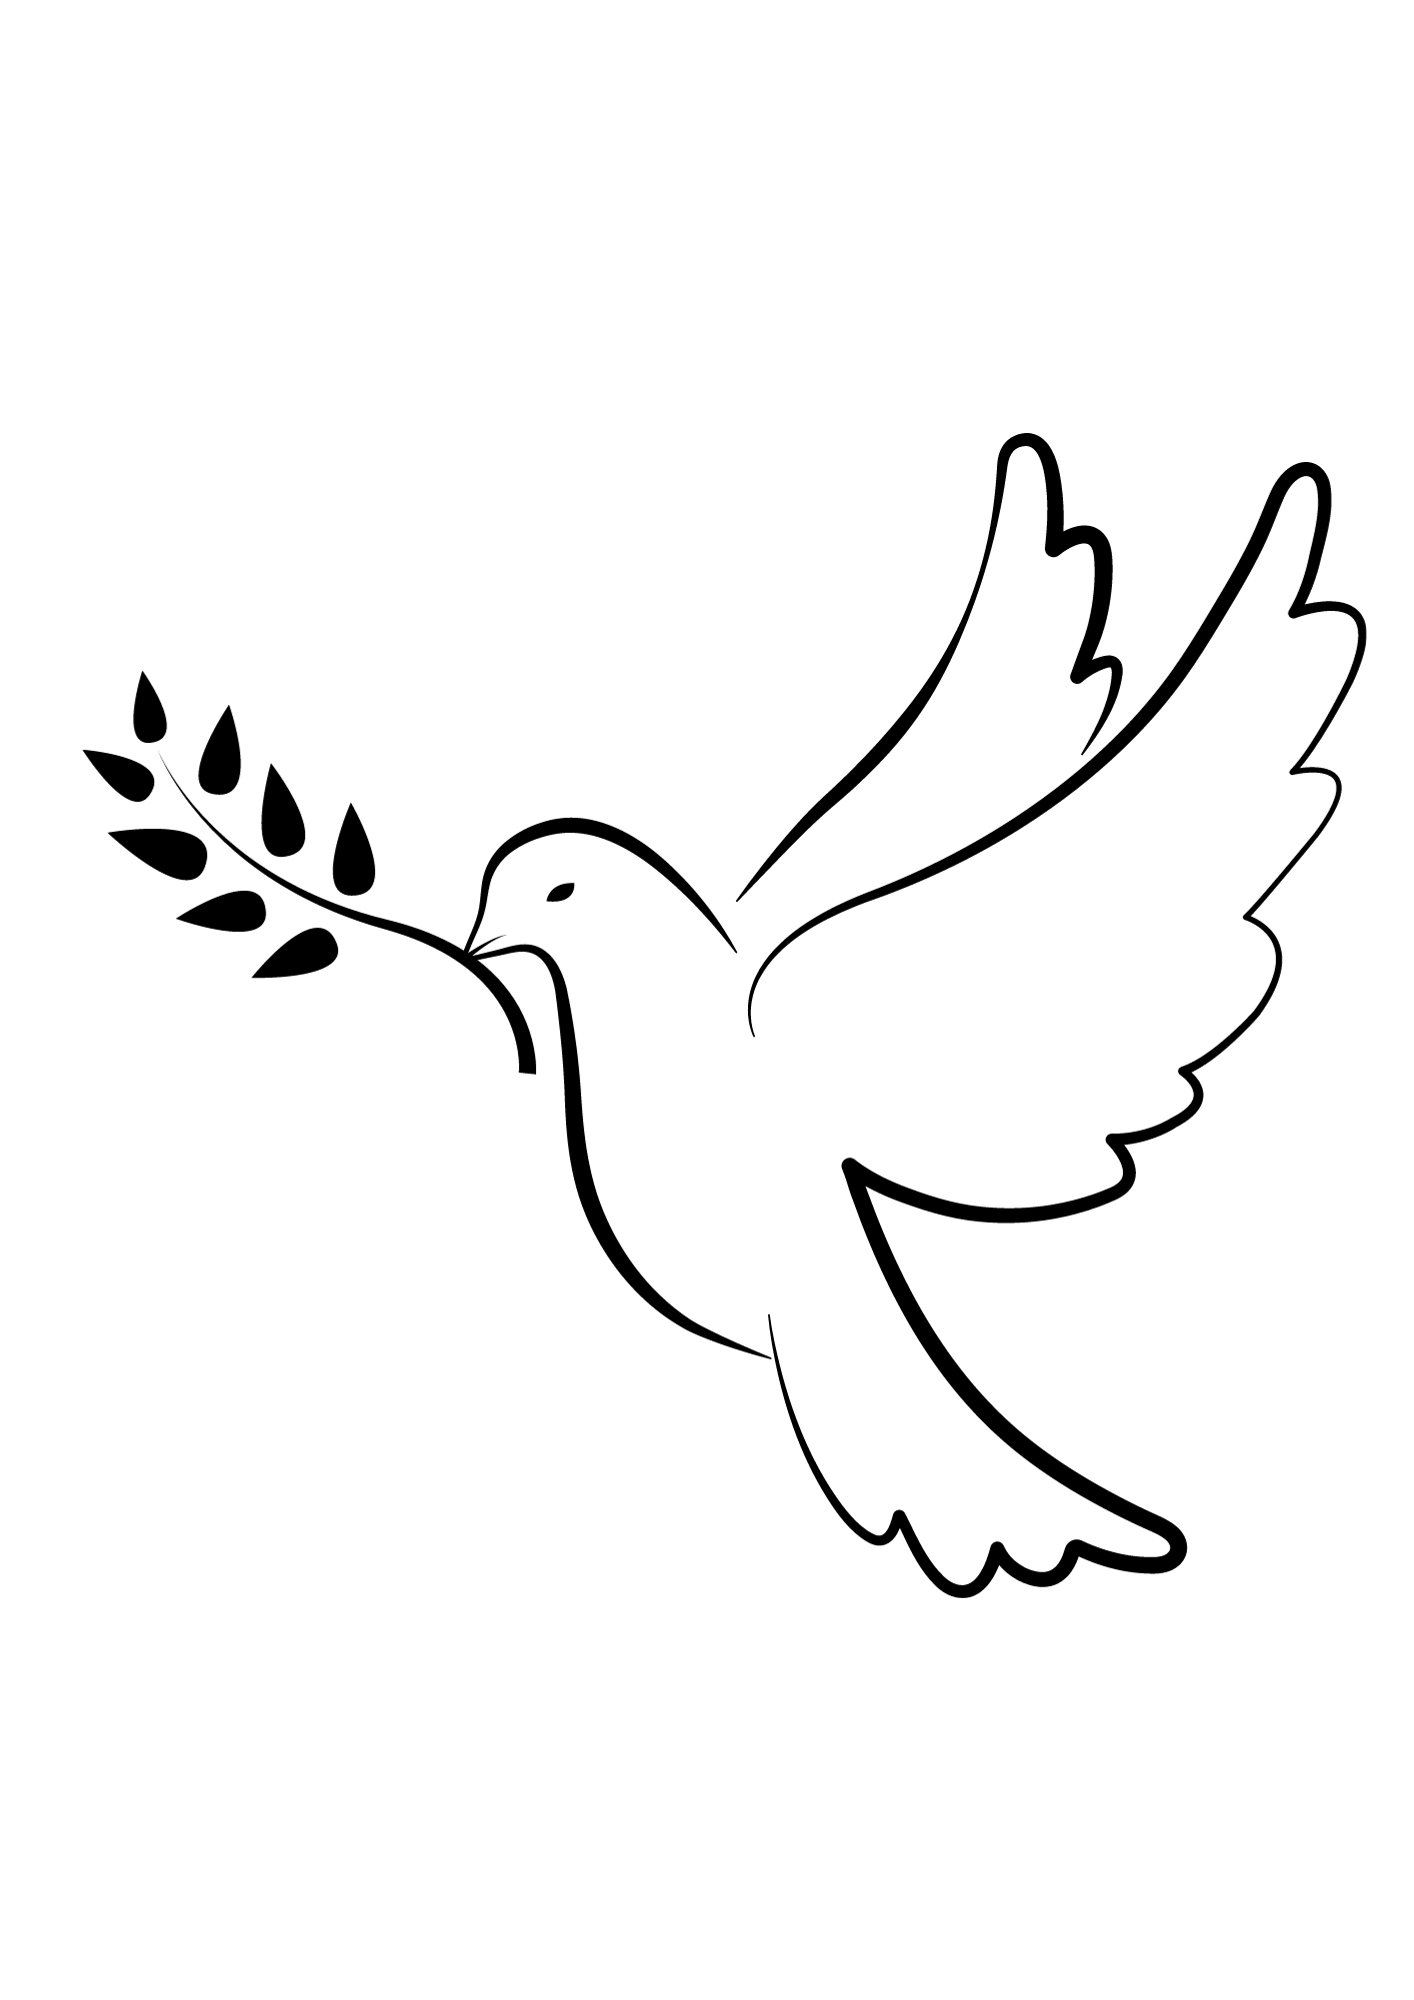 Doves Free Coloring Page